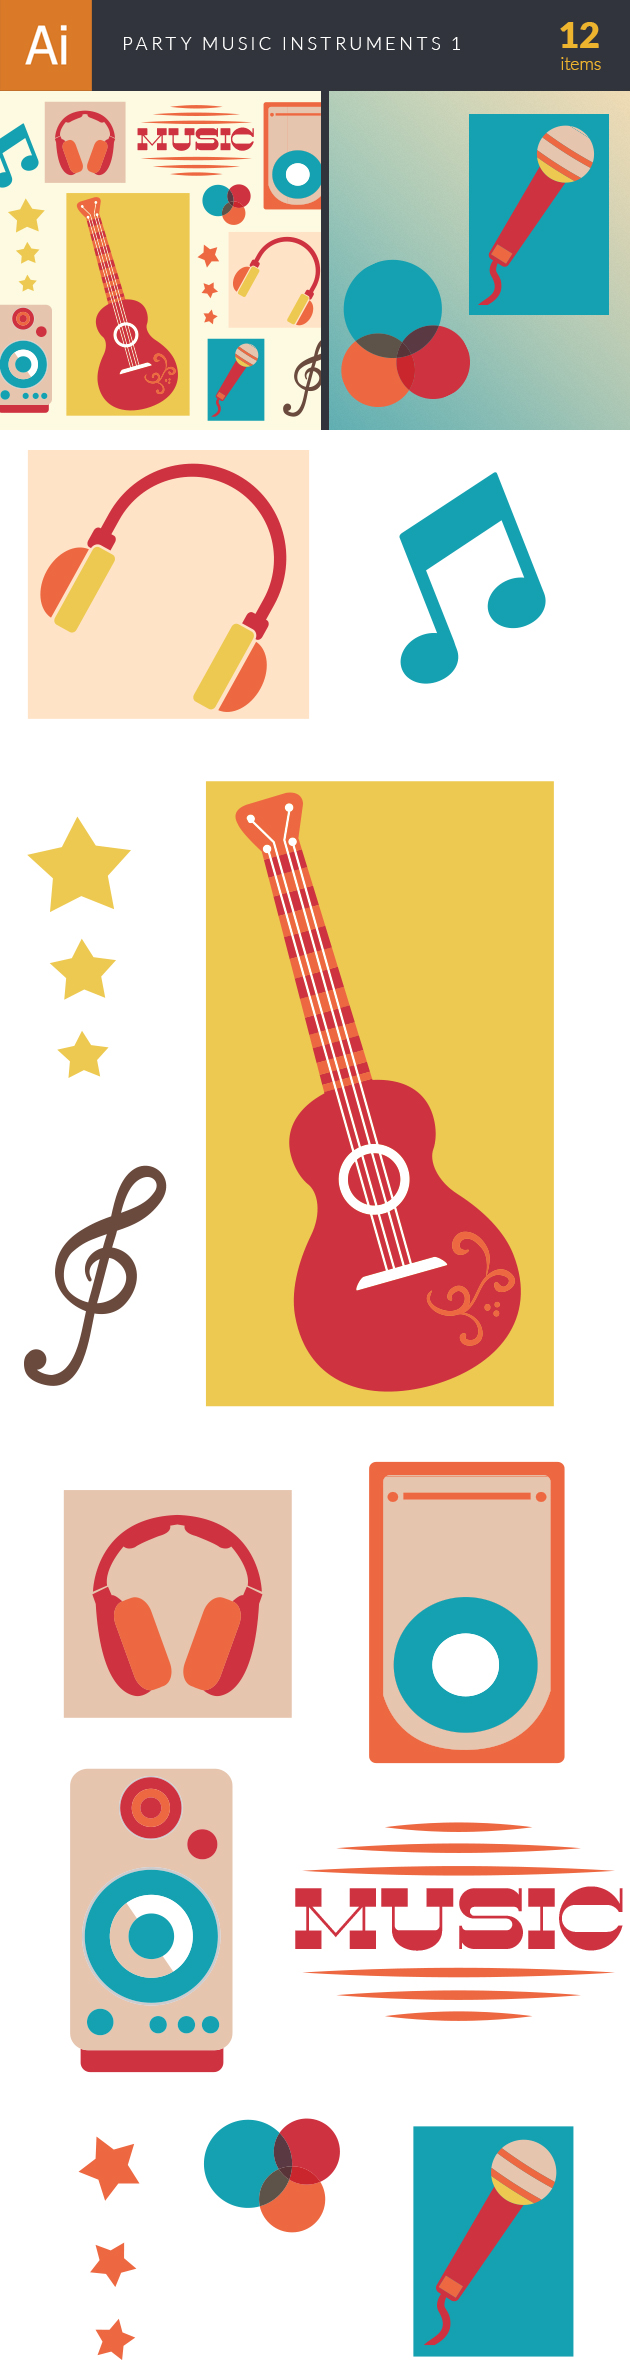 Party Music Instruments Vector Set 1 2